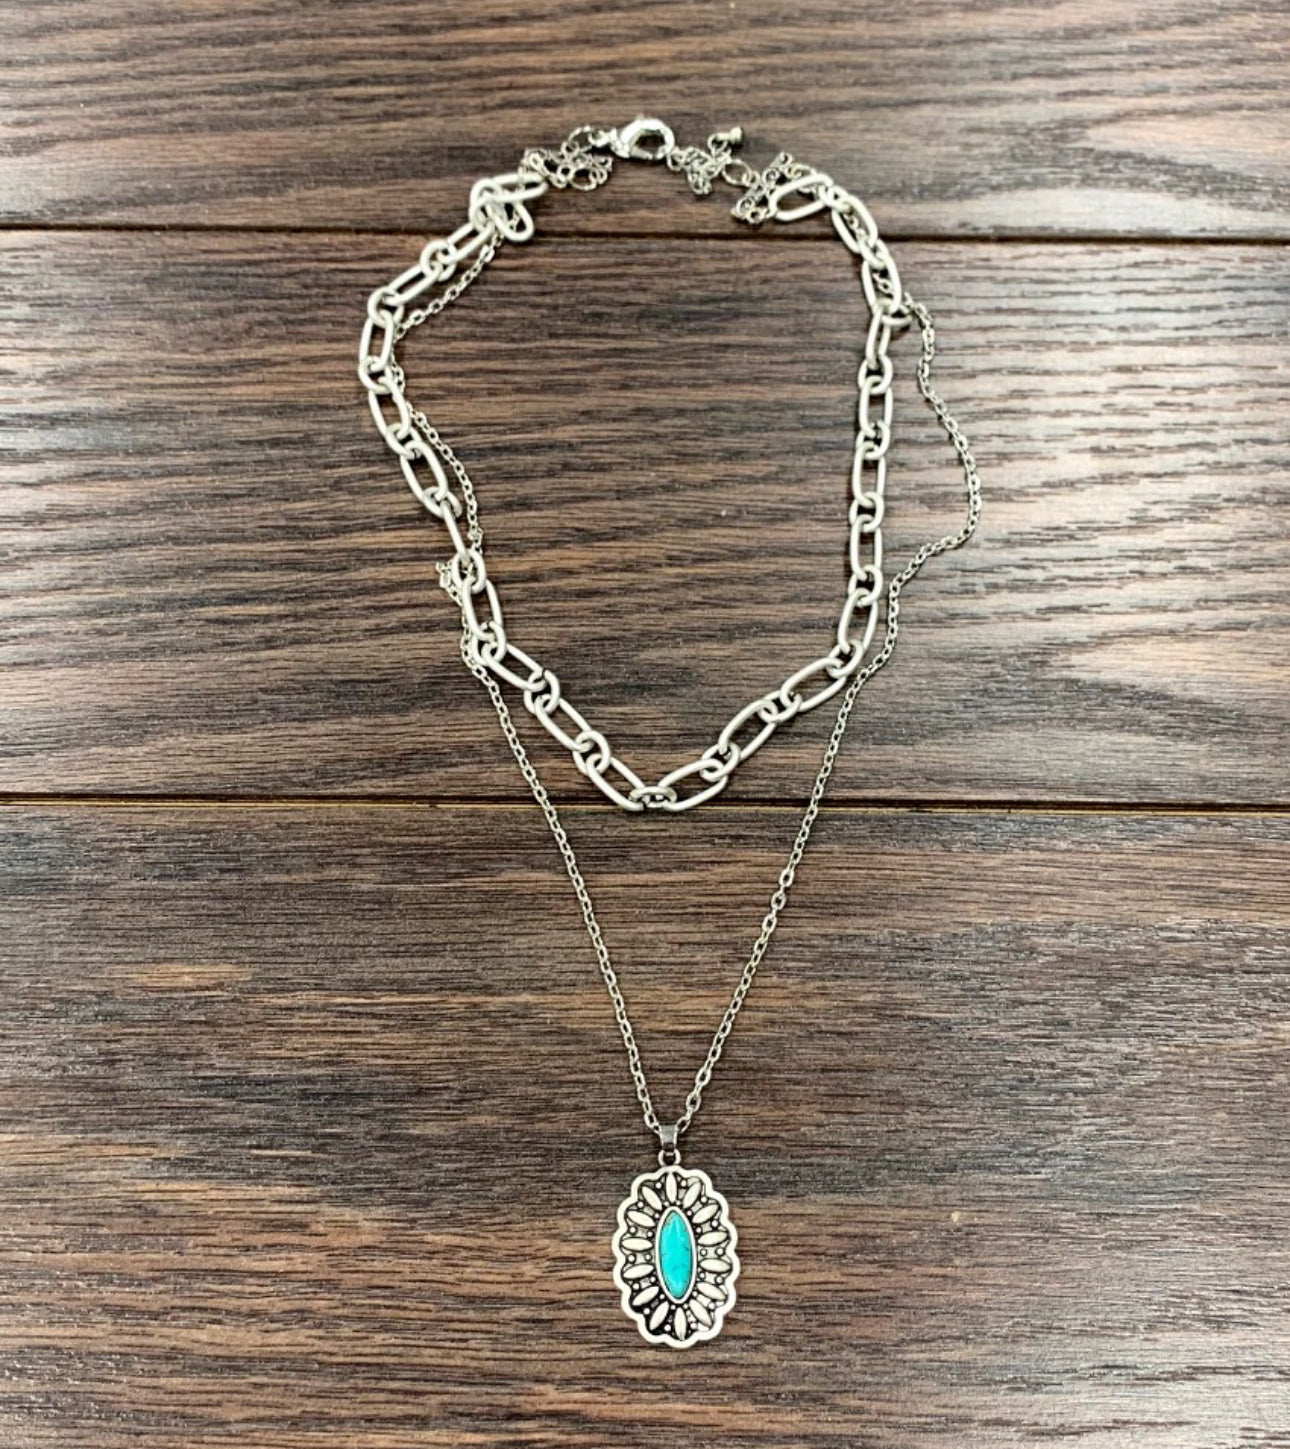 Concho layer necklace